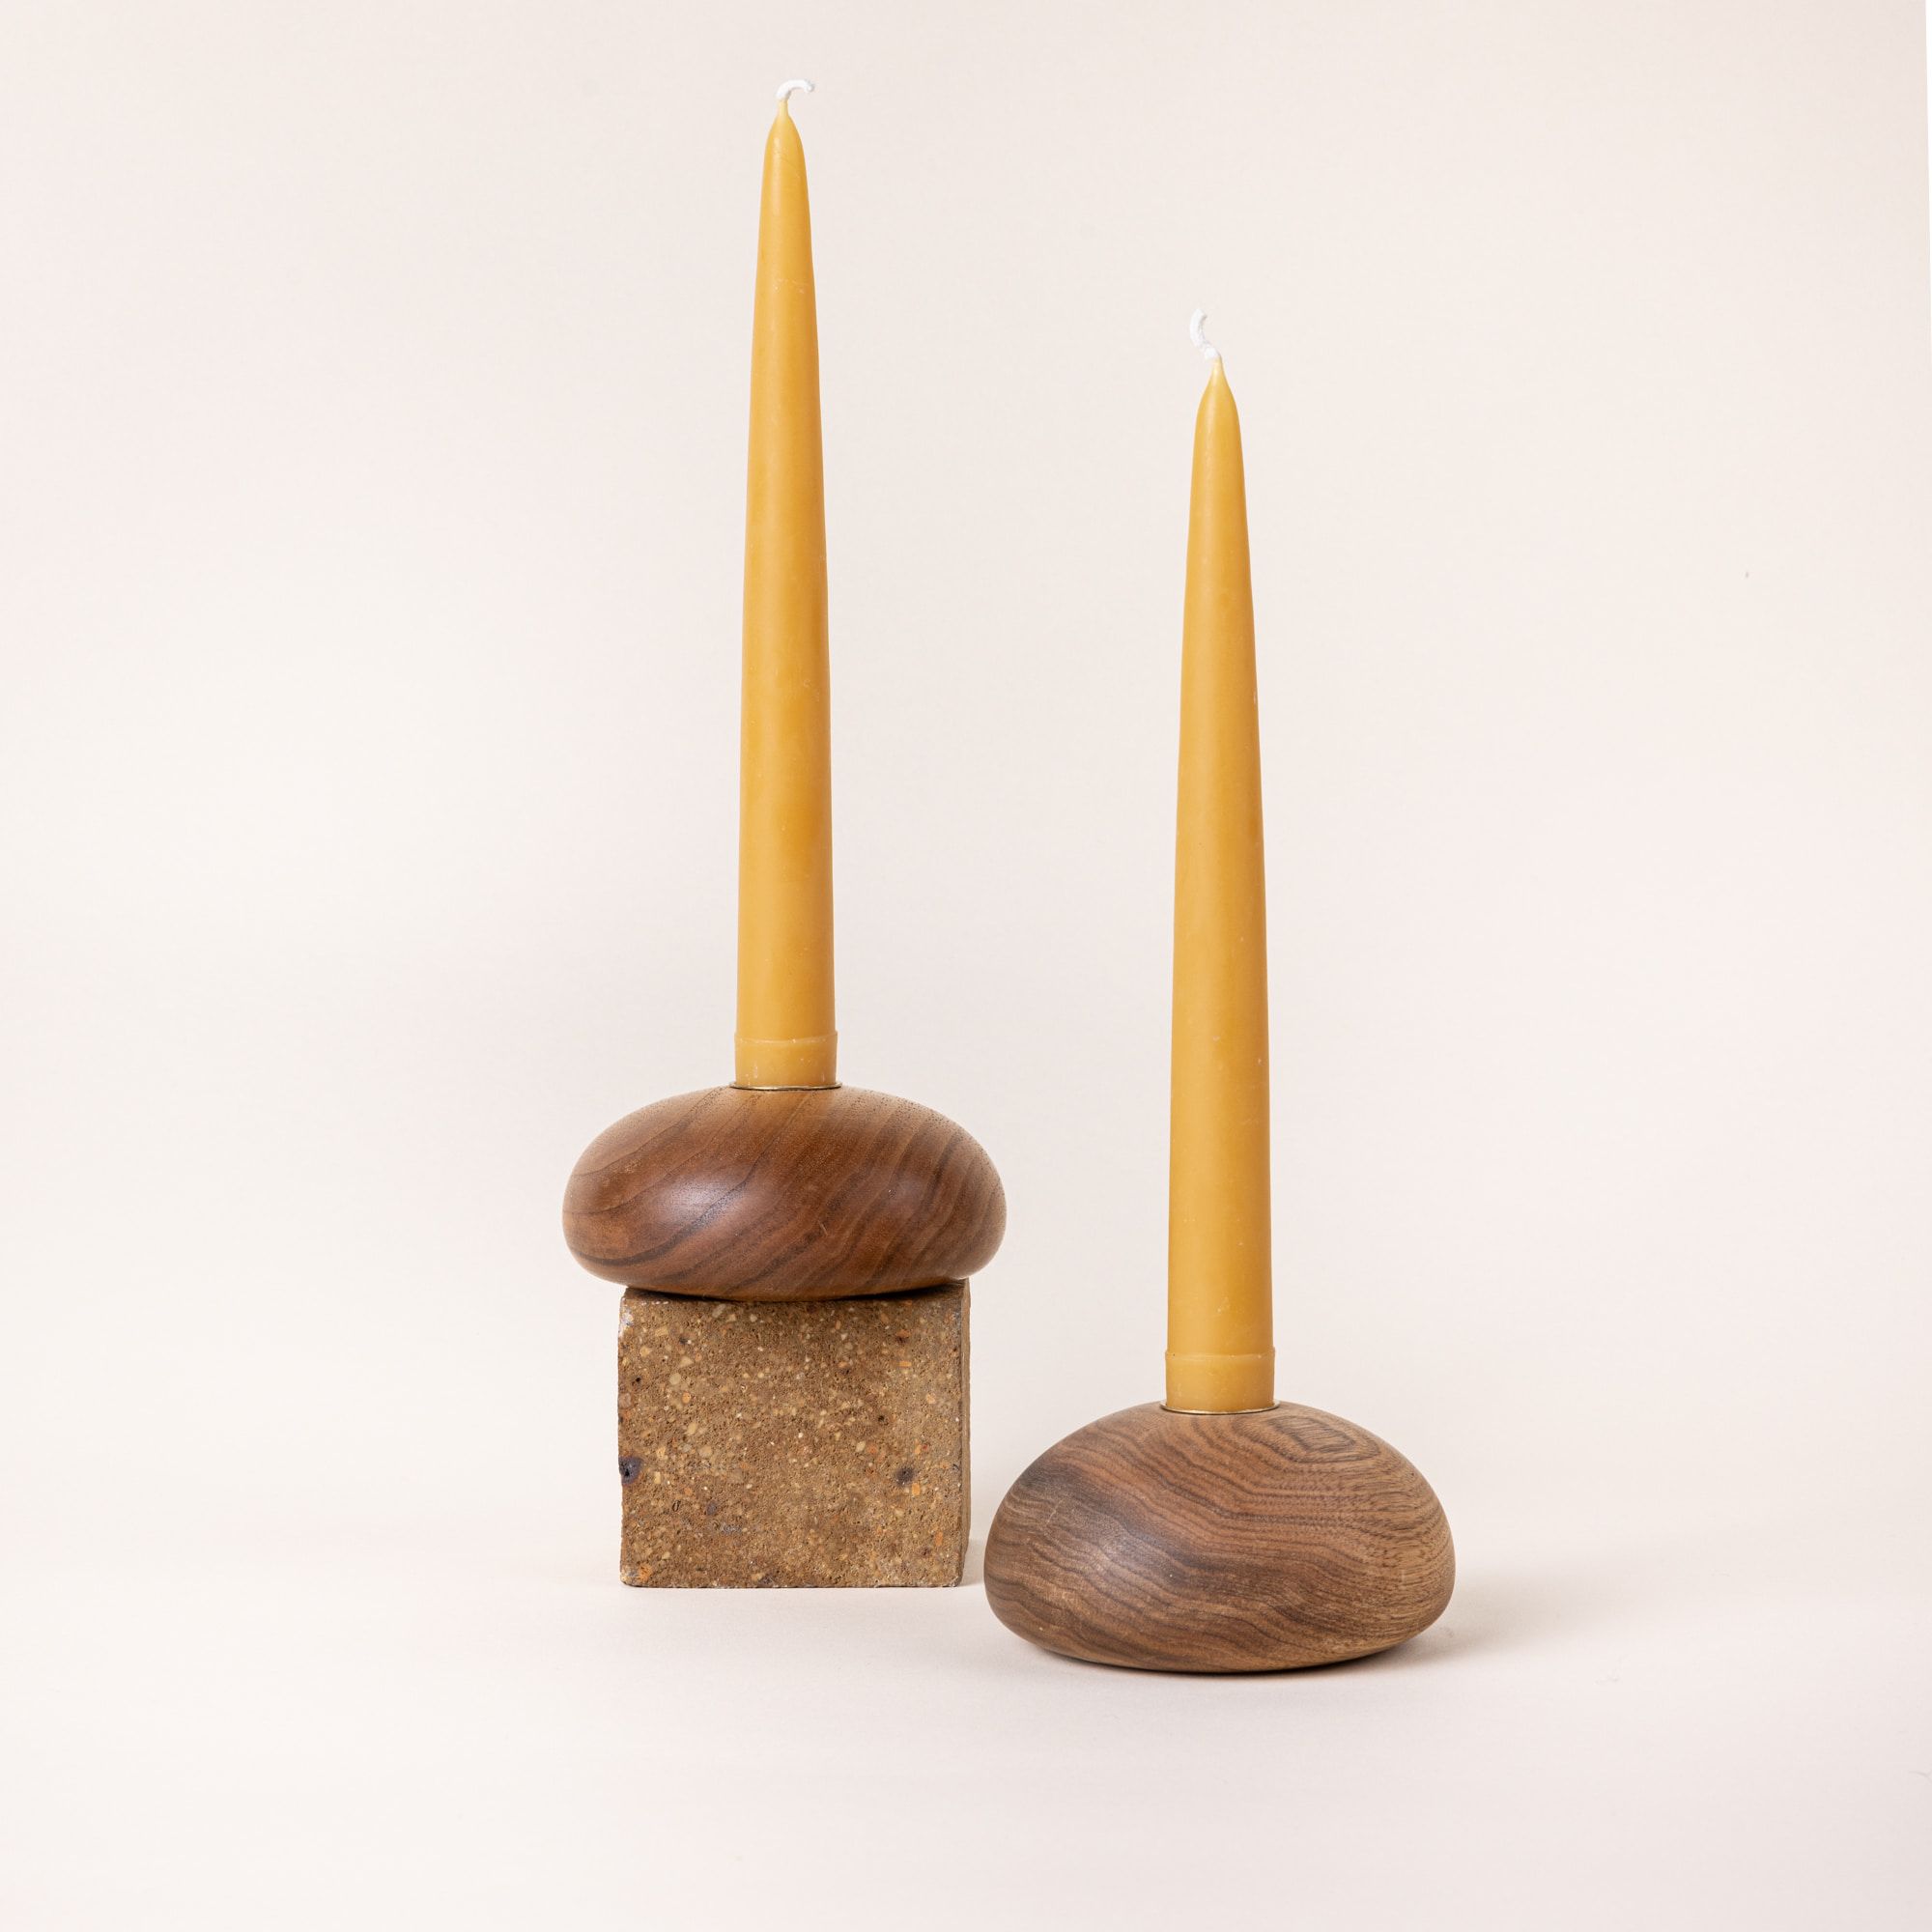 A pair of yellow beeswax taper candles sitting in round wooden candle holders